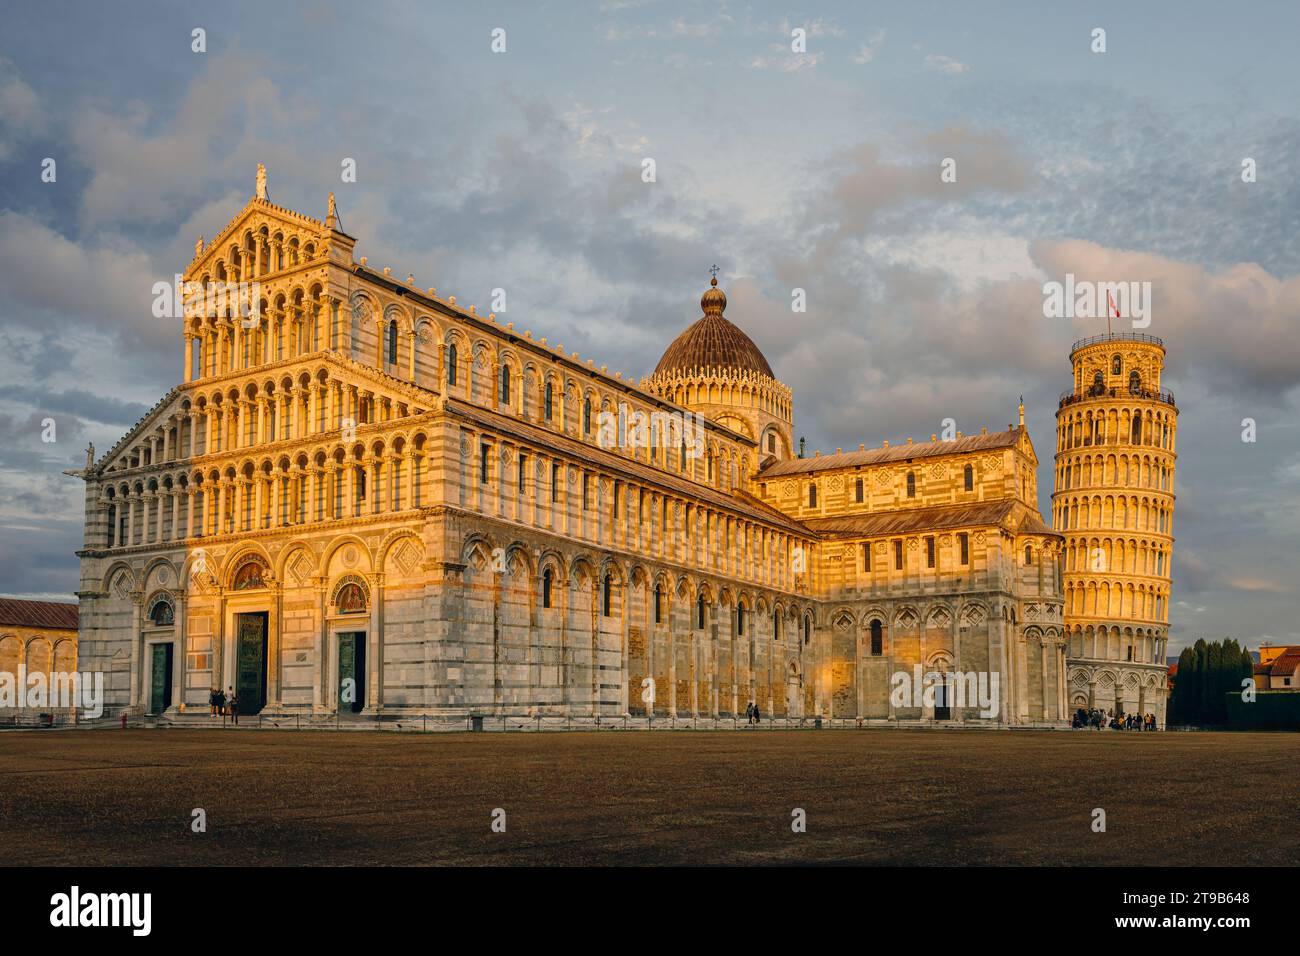 The city of Pisa historic plaza with the Pisa cathedral and the leaning tower illuminated by the golden hour light. Photo taken on 22nd of October 202 Stock Photo